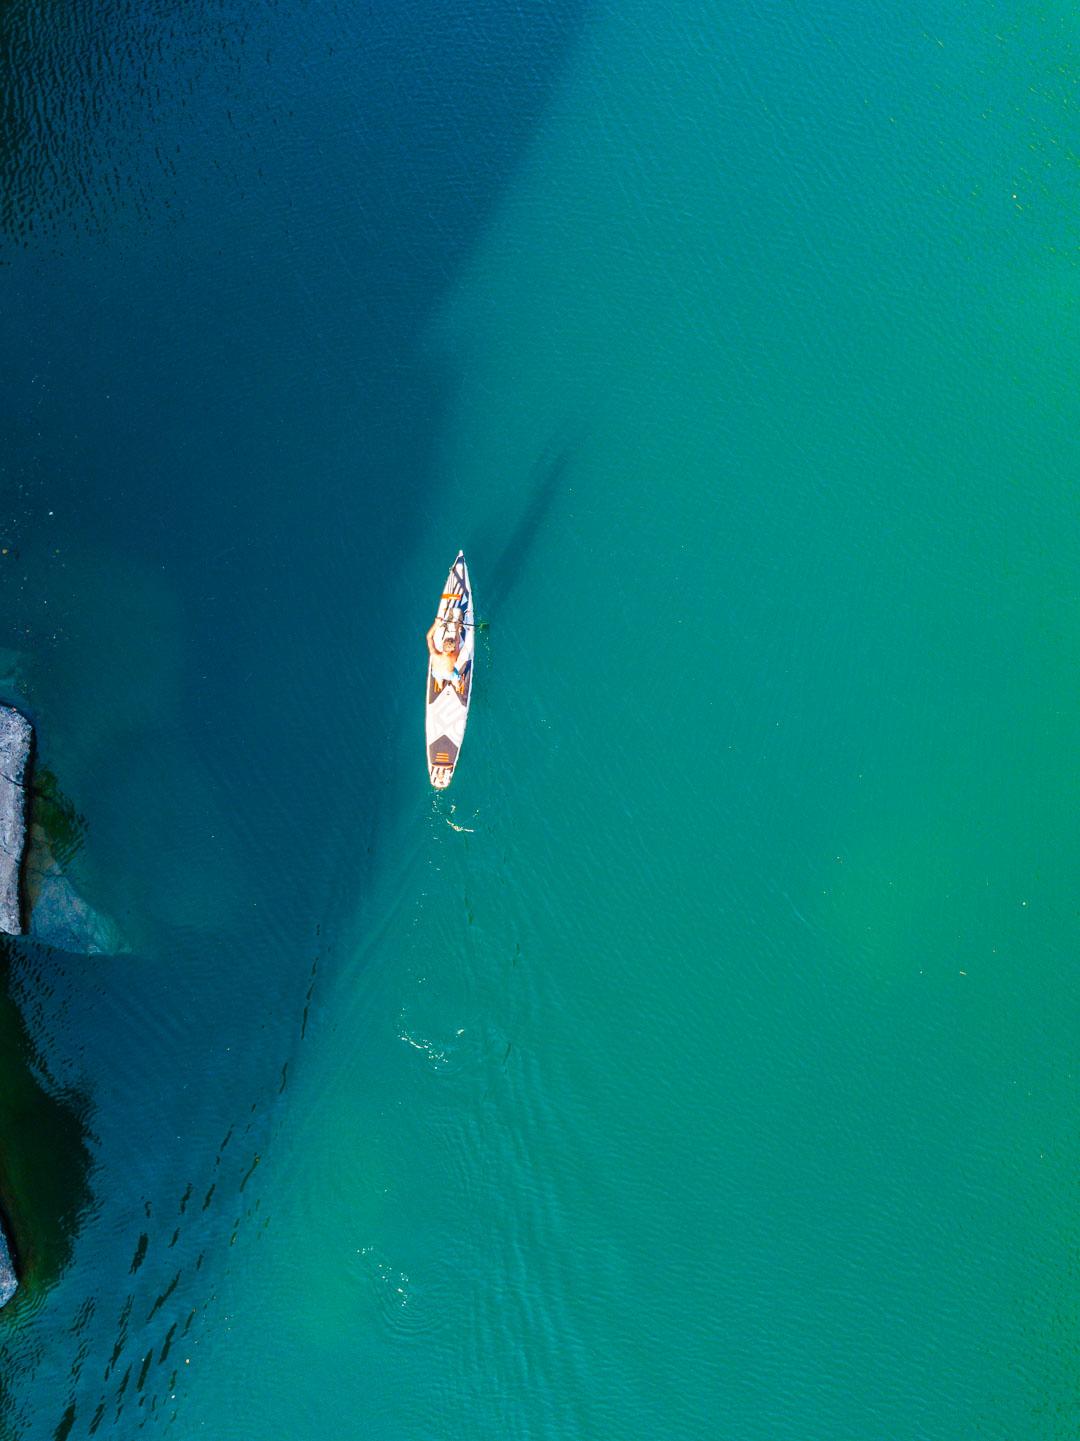 rowing boat from above